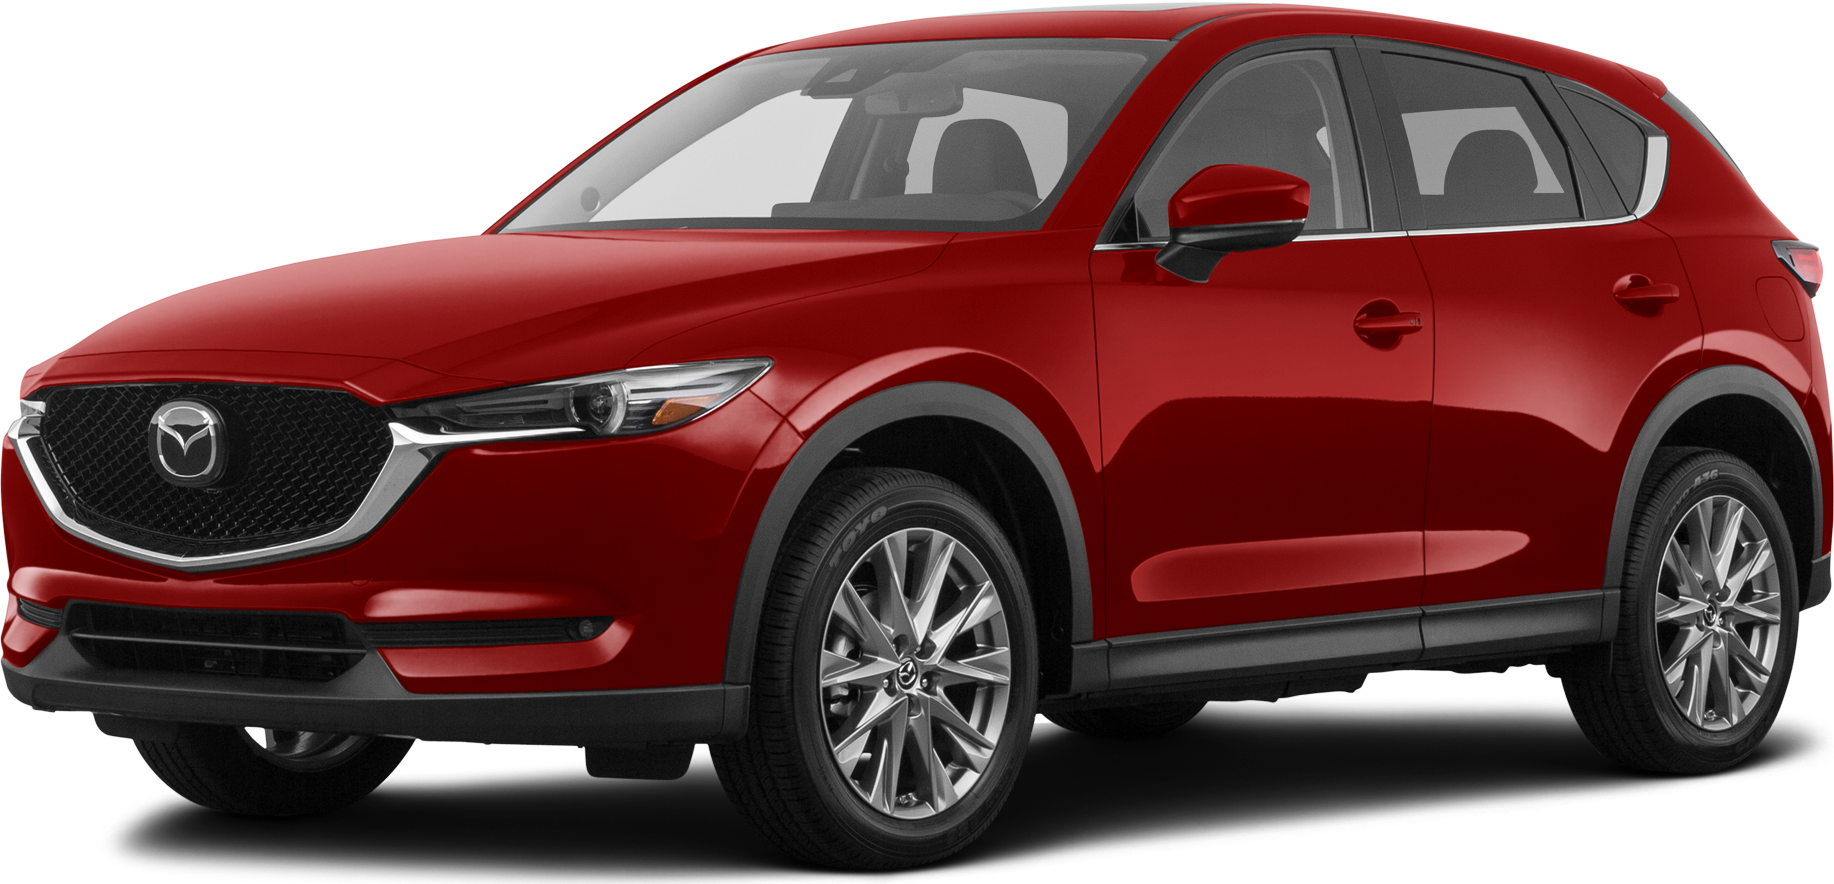 New 2021 MAZDA CX5 Reviews, Pricing & Specs Kelley Blue Book